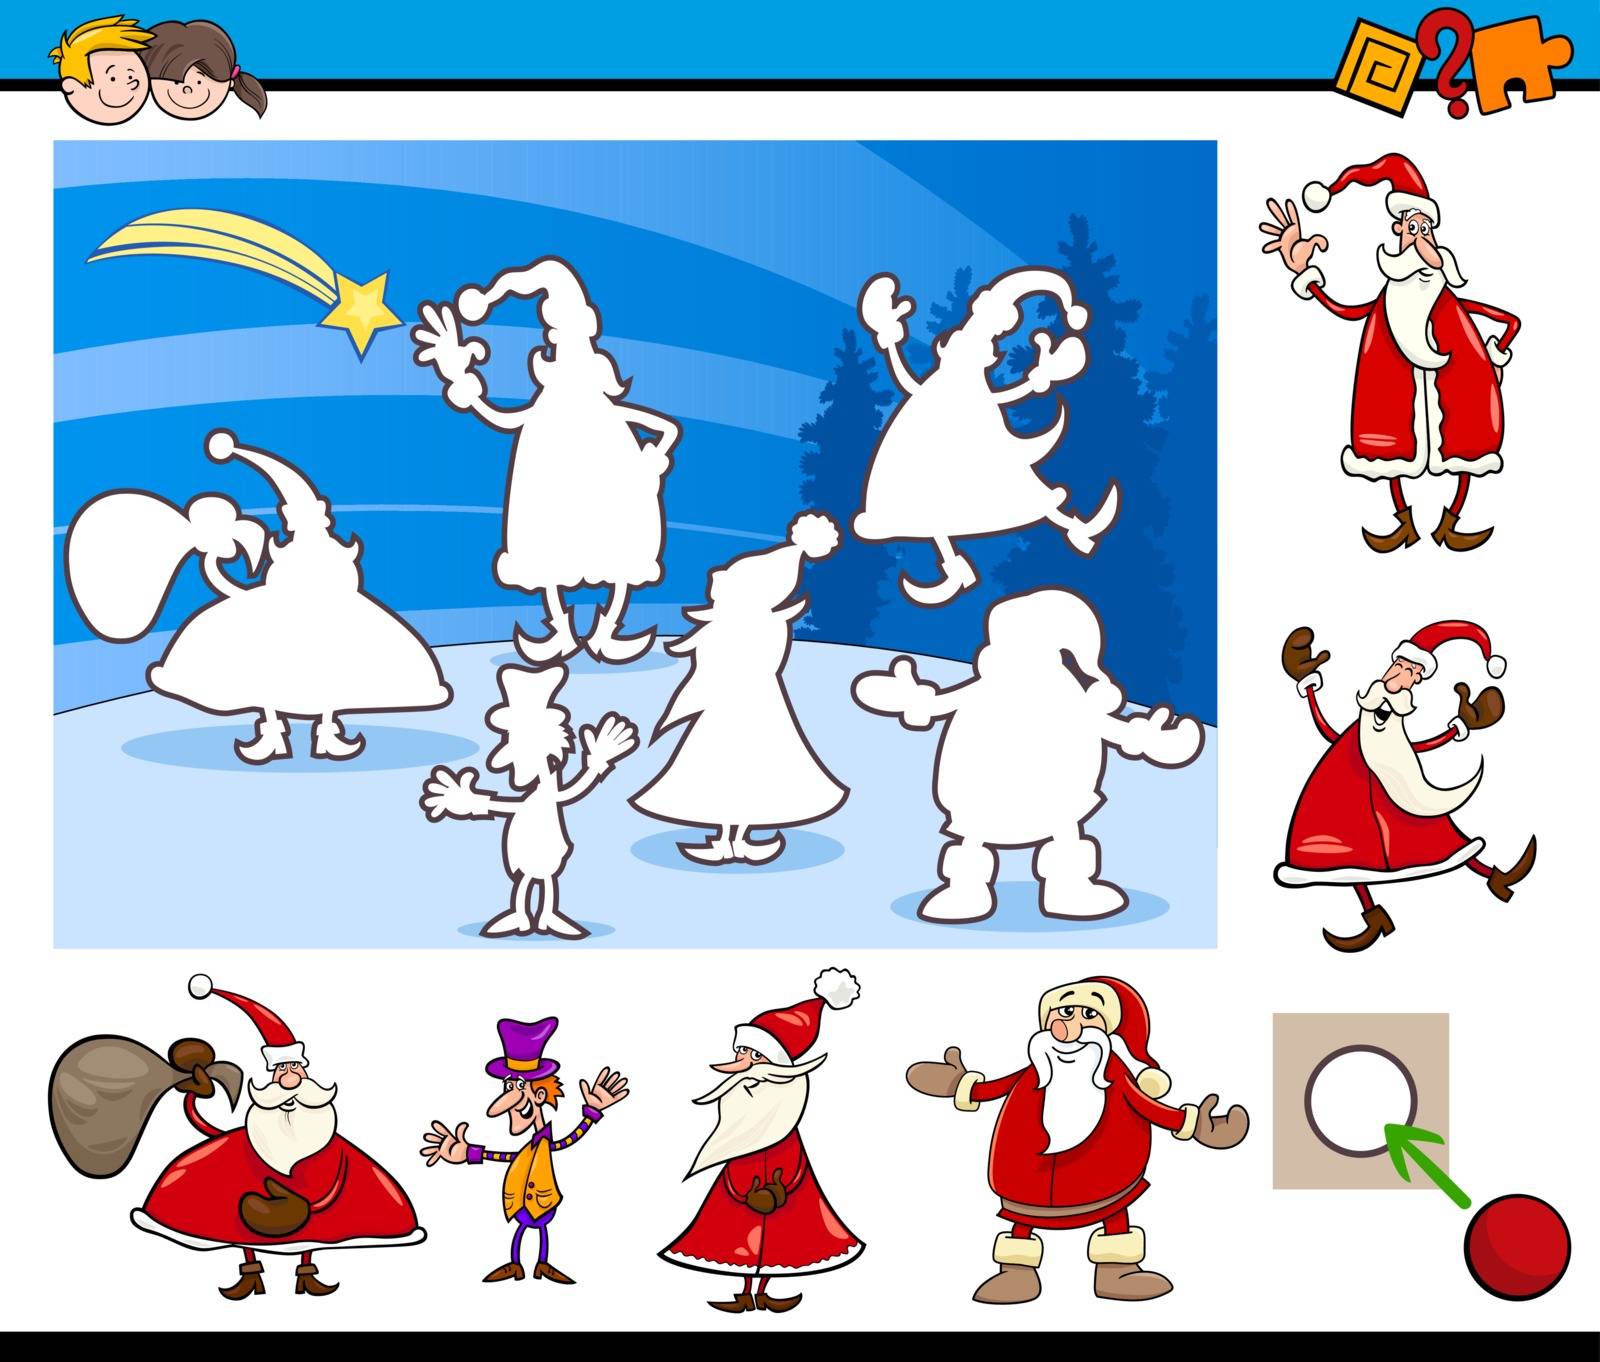 Cartoon Illustration of Educational Activity for Preschool Children with Santa Claus Characters on Christmas Time